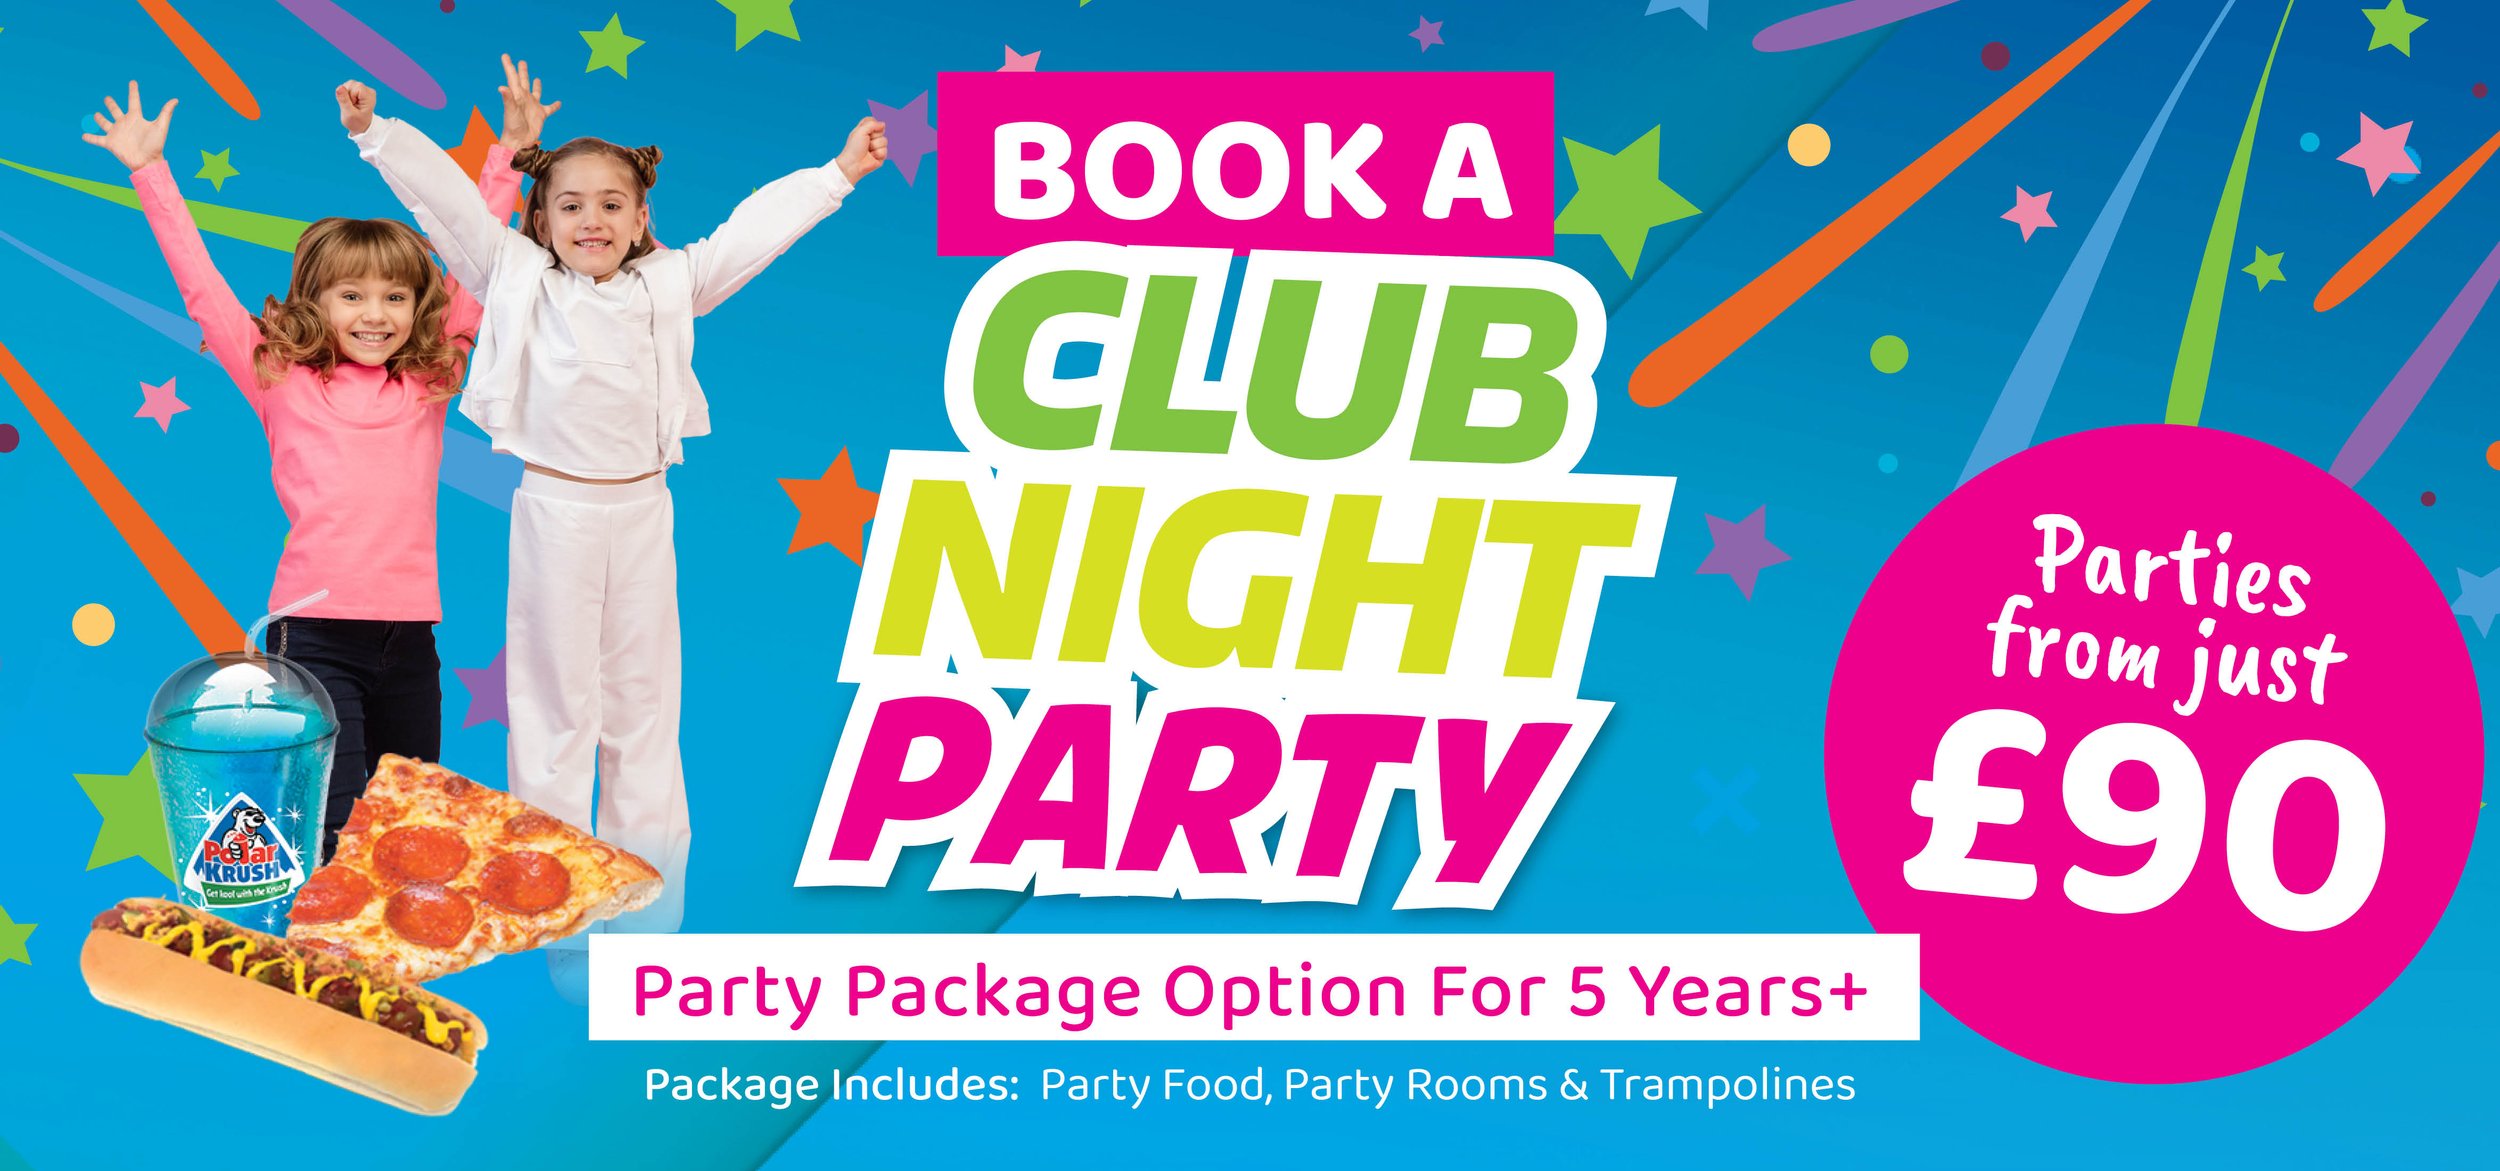 Book A Club Night Party - Website Banners.jpg